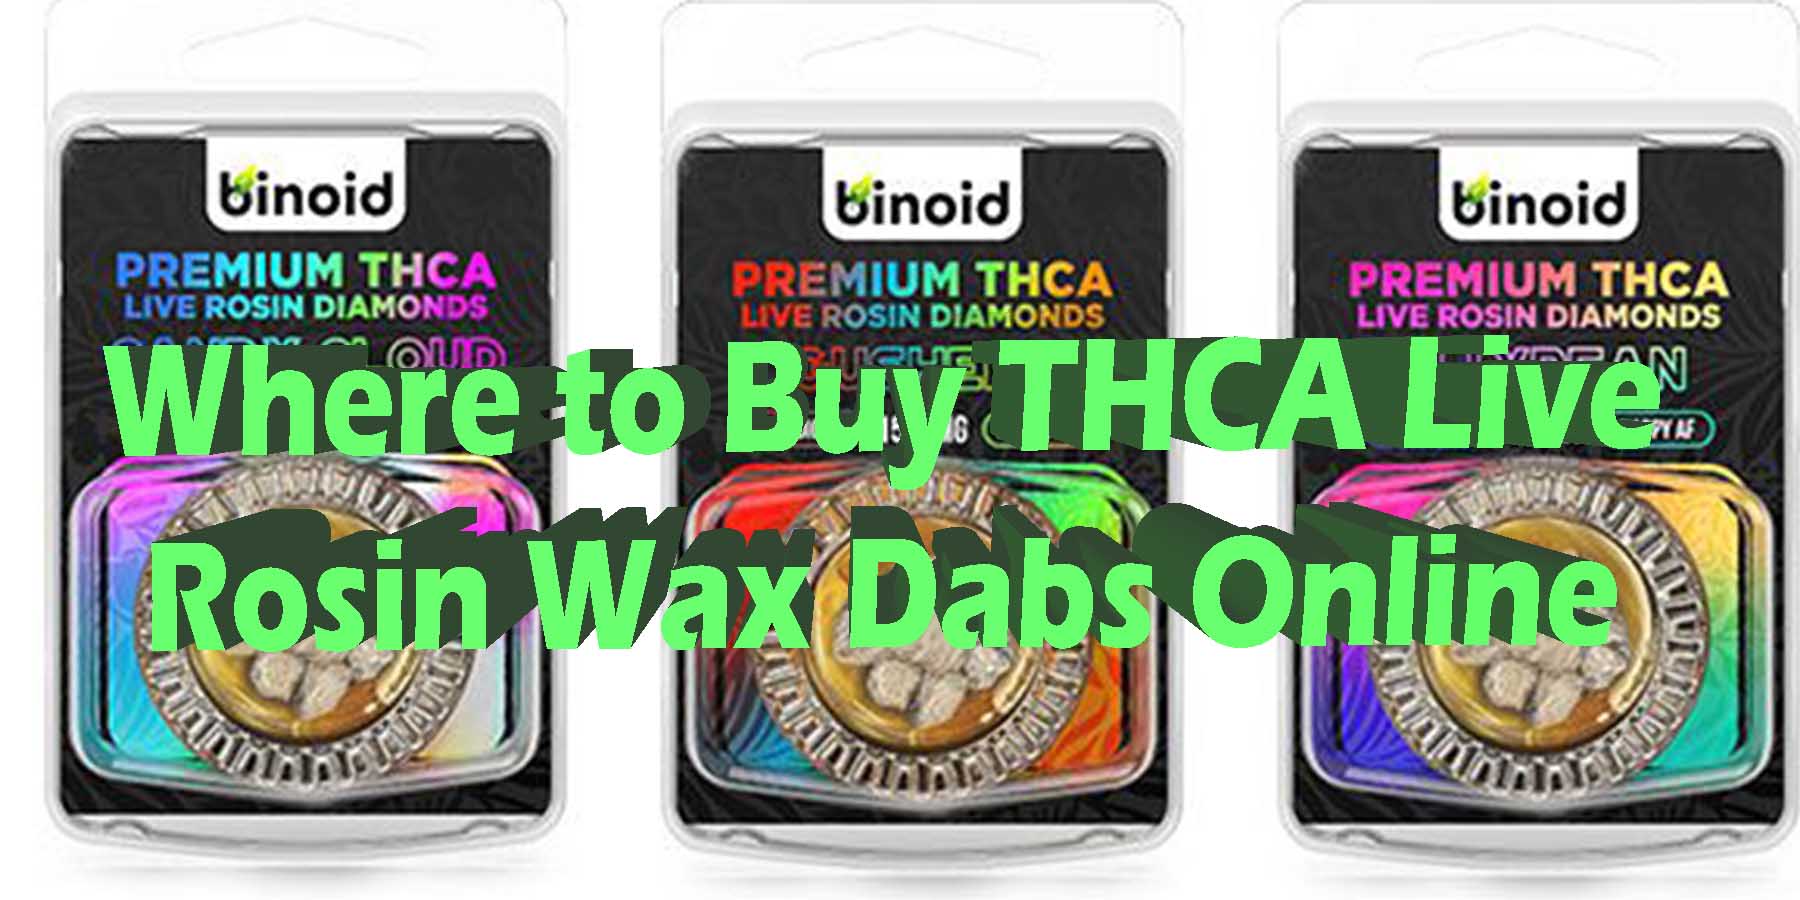 Where to Buy THCA Live Rosin Wax Dabs Online WhereToGet HowToGetNearMe BestPlace LowestPrice Coupon Discount For Smoking Best High Smoke Shop Online Near Me Binoid.